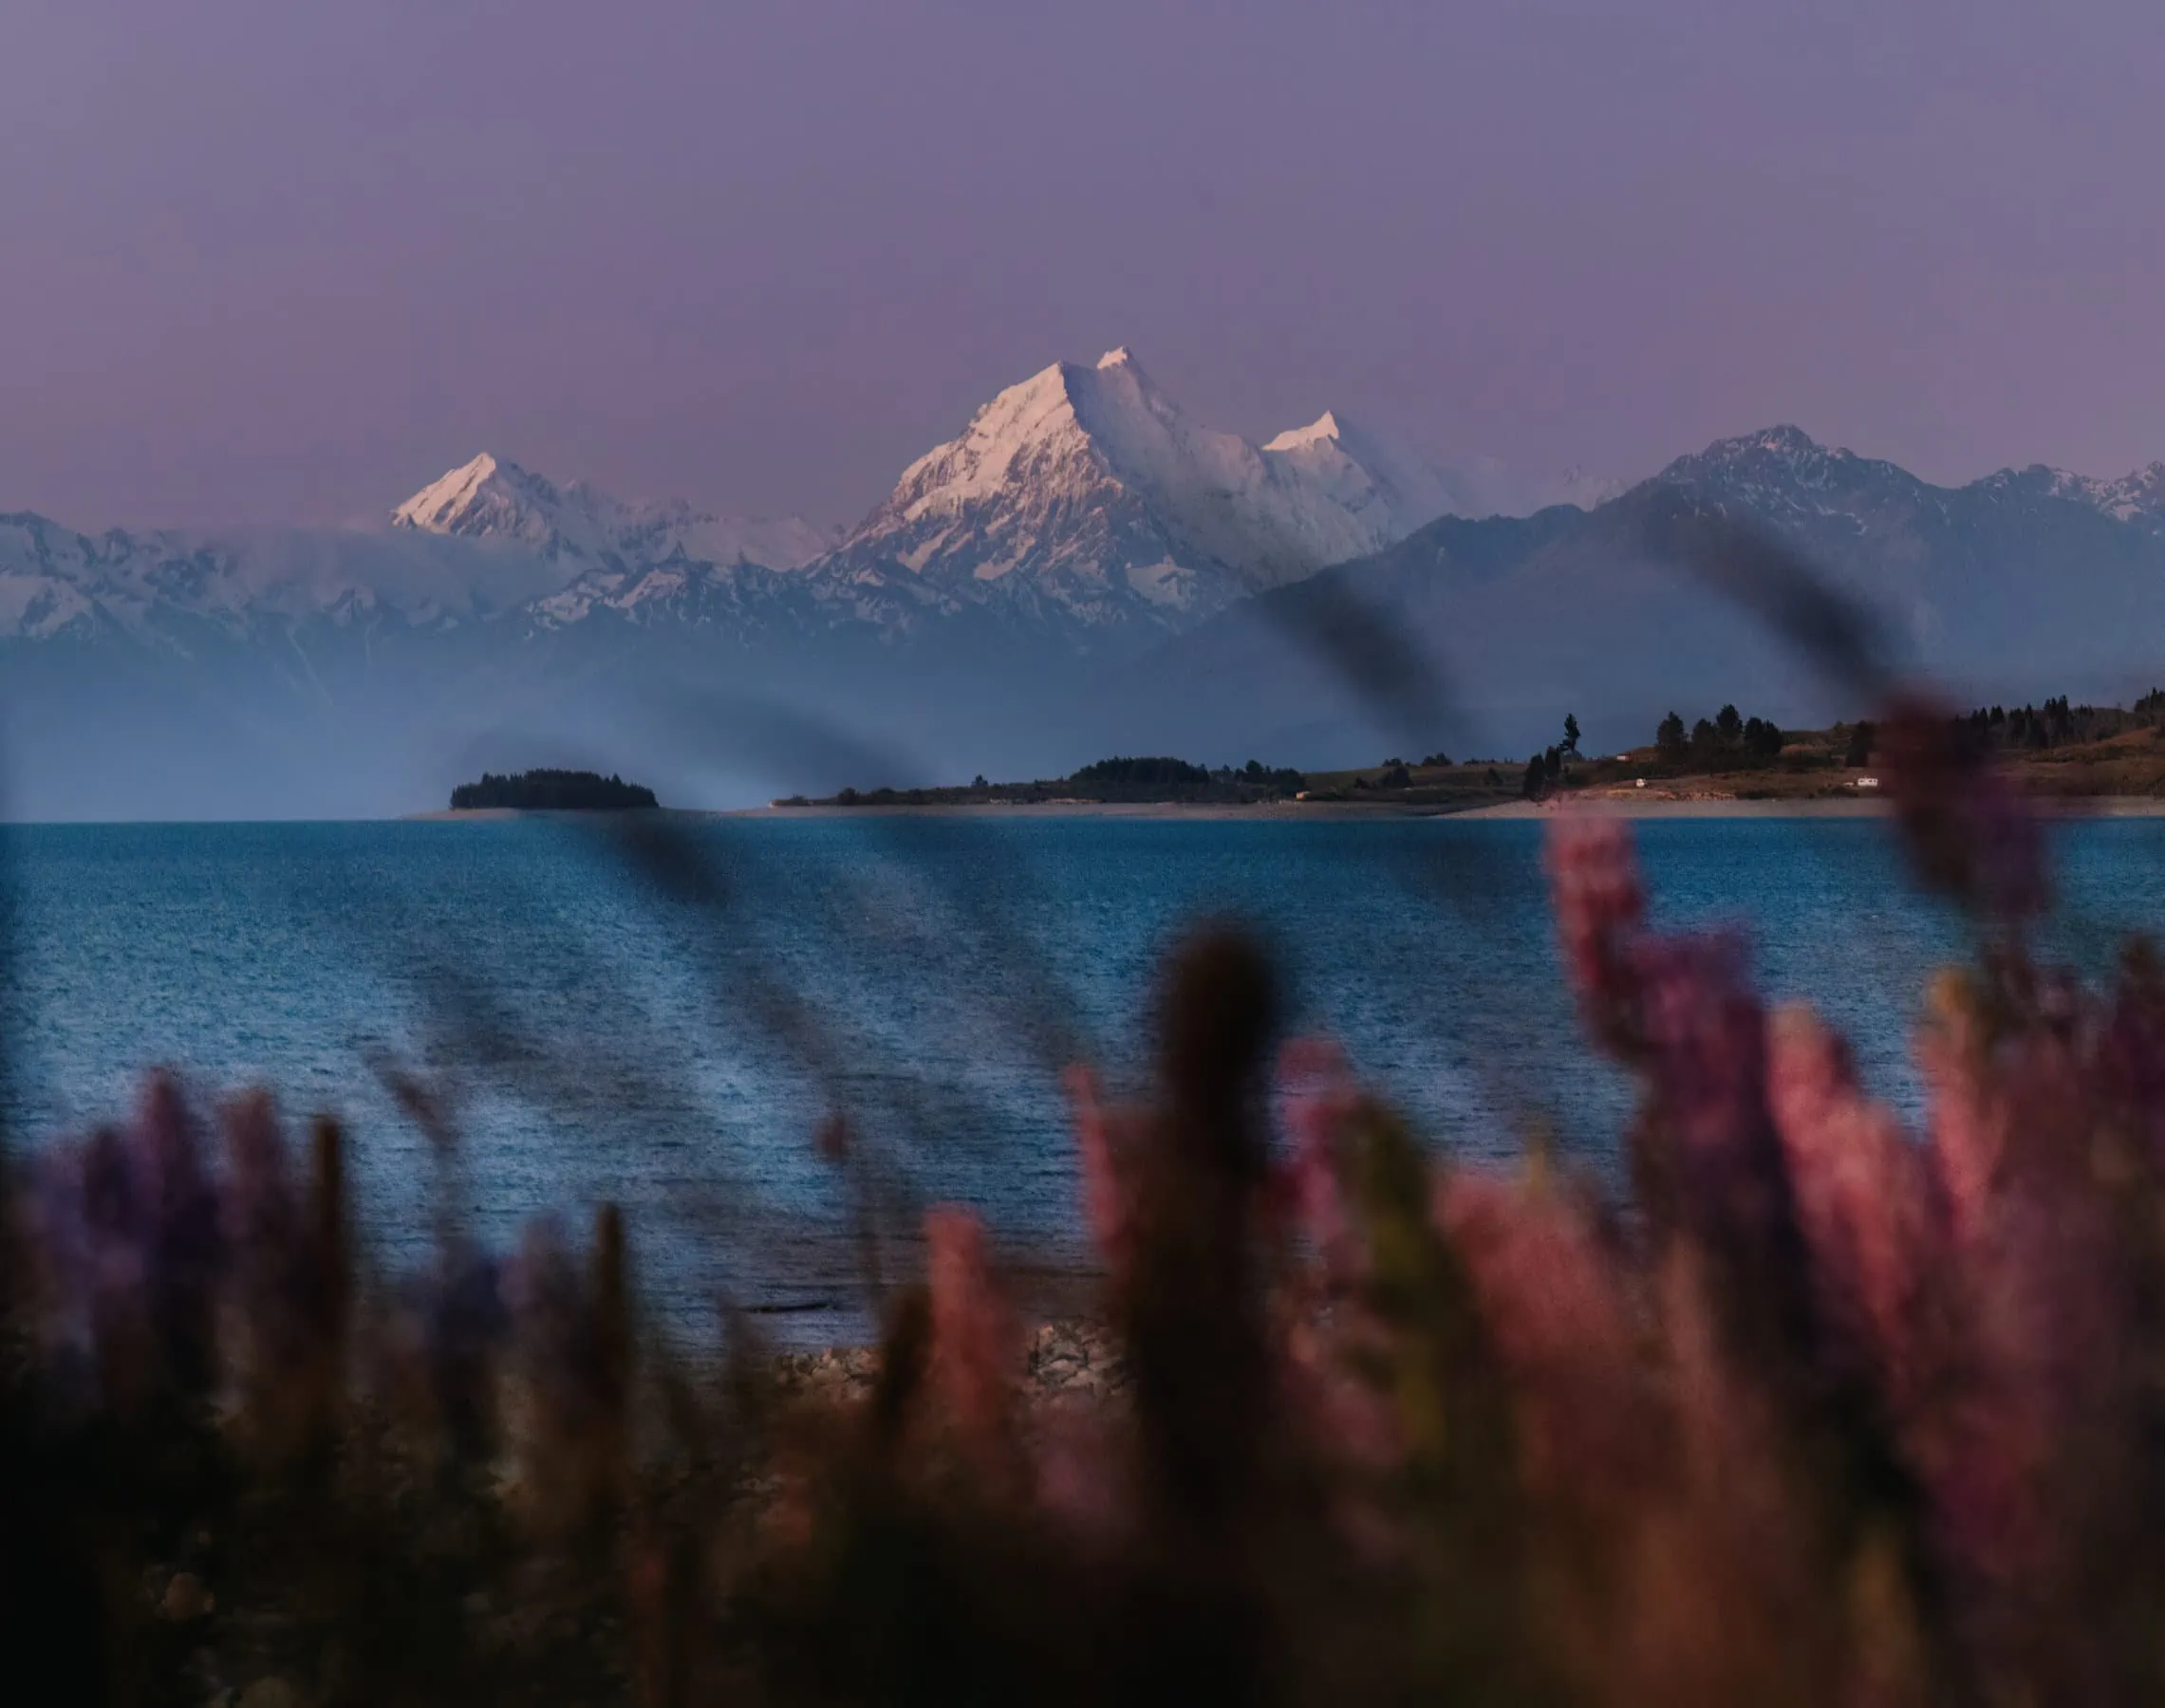 A view of Mt Cook at dusk.